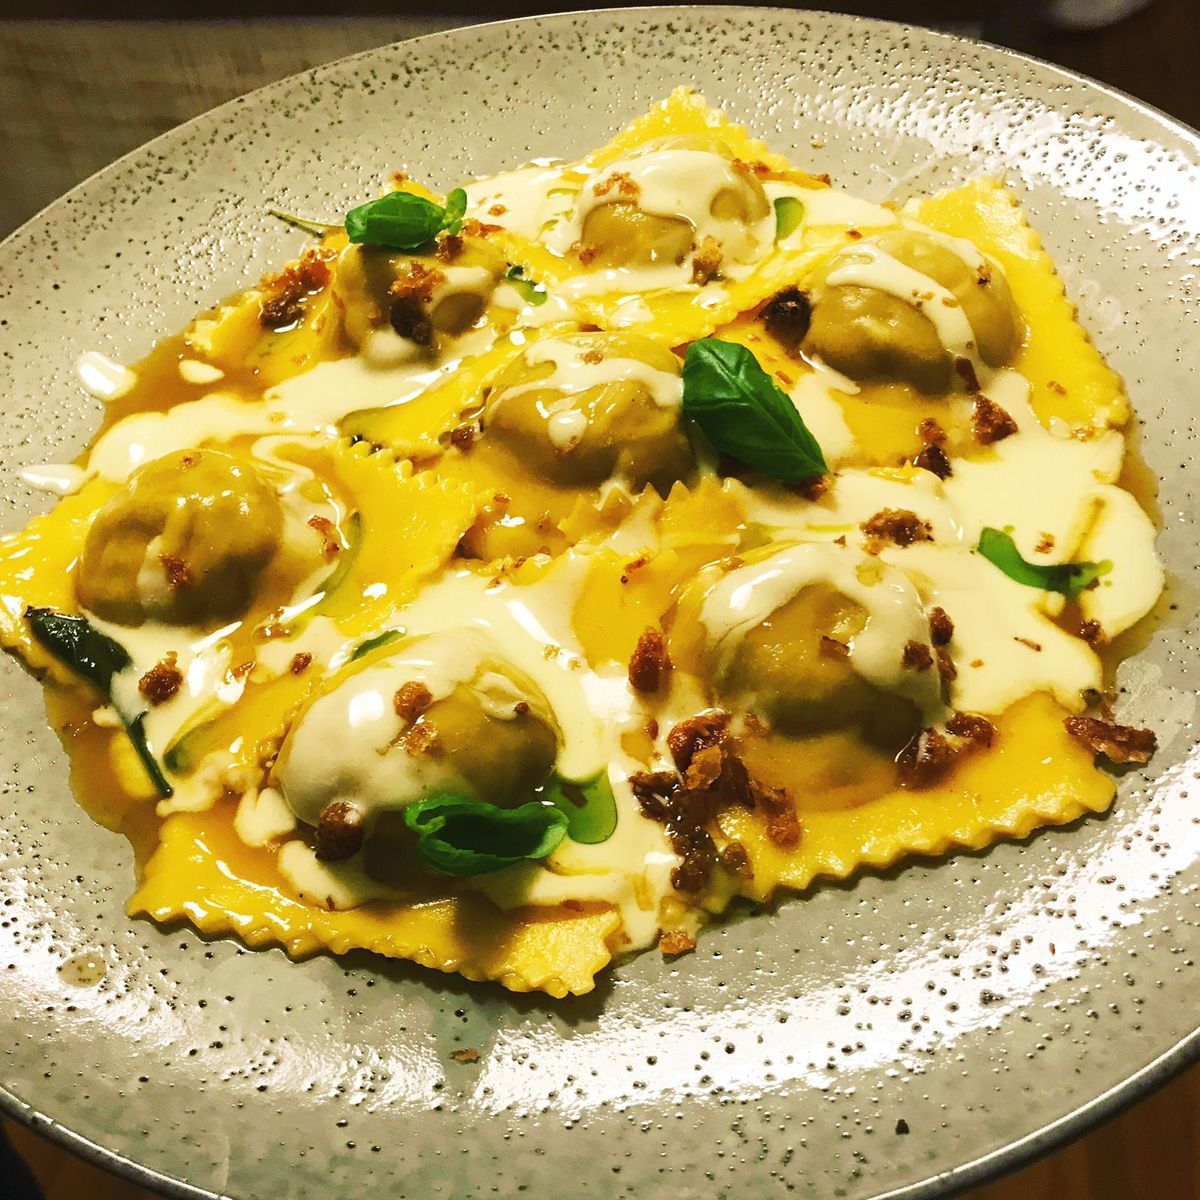 Braised duck, and duck liver ravioli. A taste of Pasta & Cuore with Chef Gabriele Marangoni